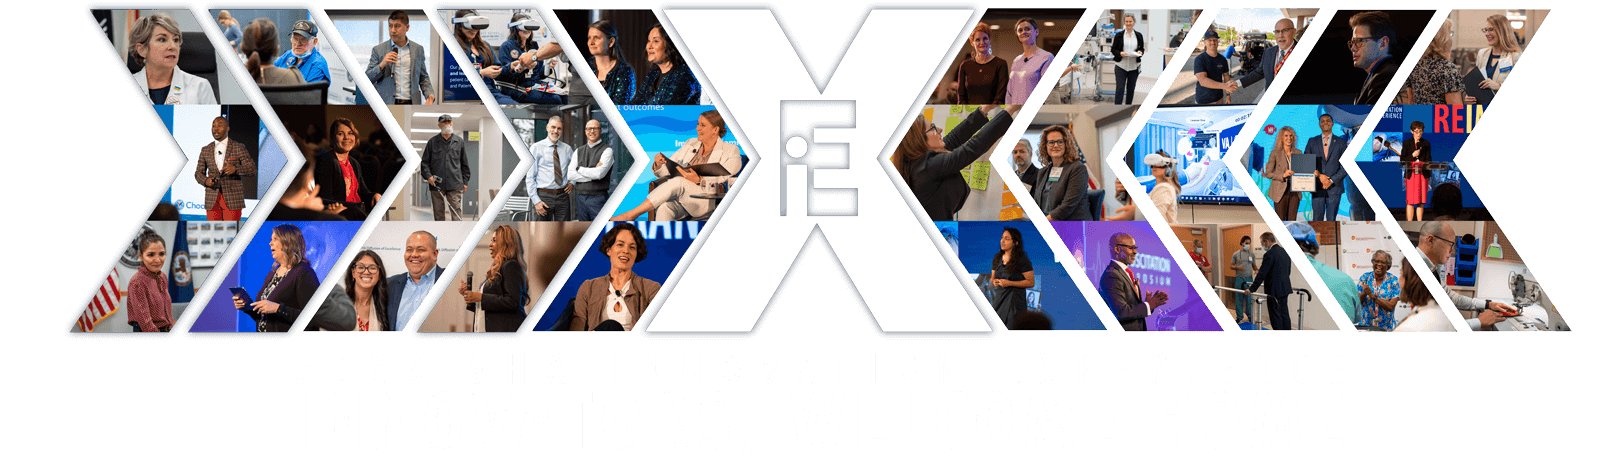 2023 Innovation Experience Logo. Large X in center with photos of innovators off to the left and right.